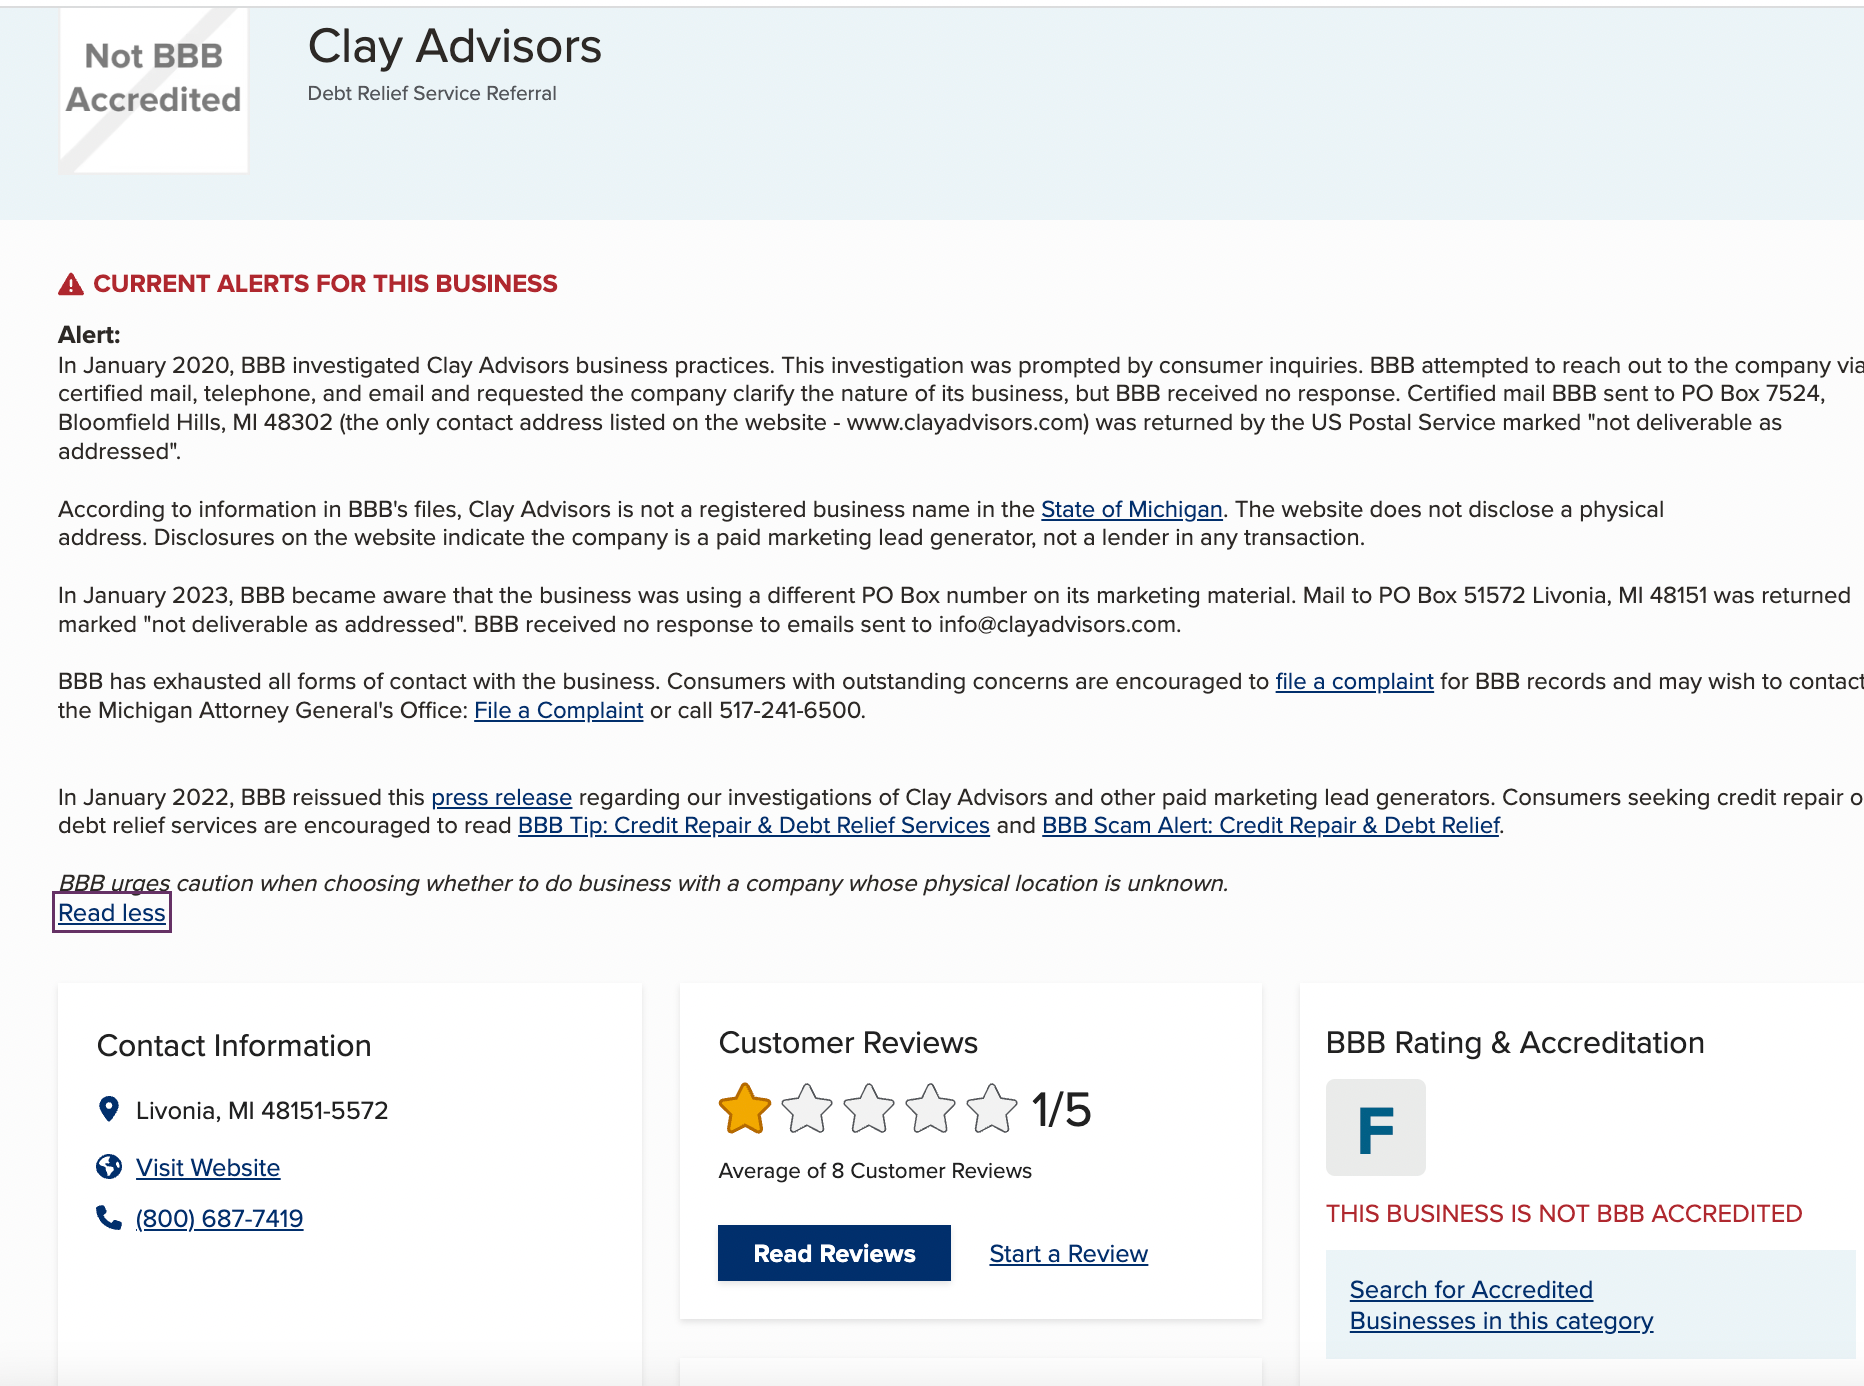 Avoid debt consolidation loan lenders with poor reviews. Clay Advisors reviews and alerts from the BBB will give borrowers cause for delay.